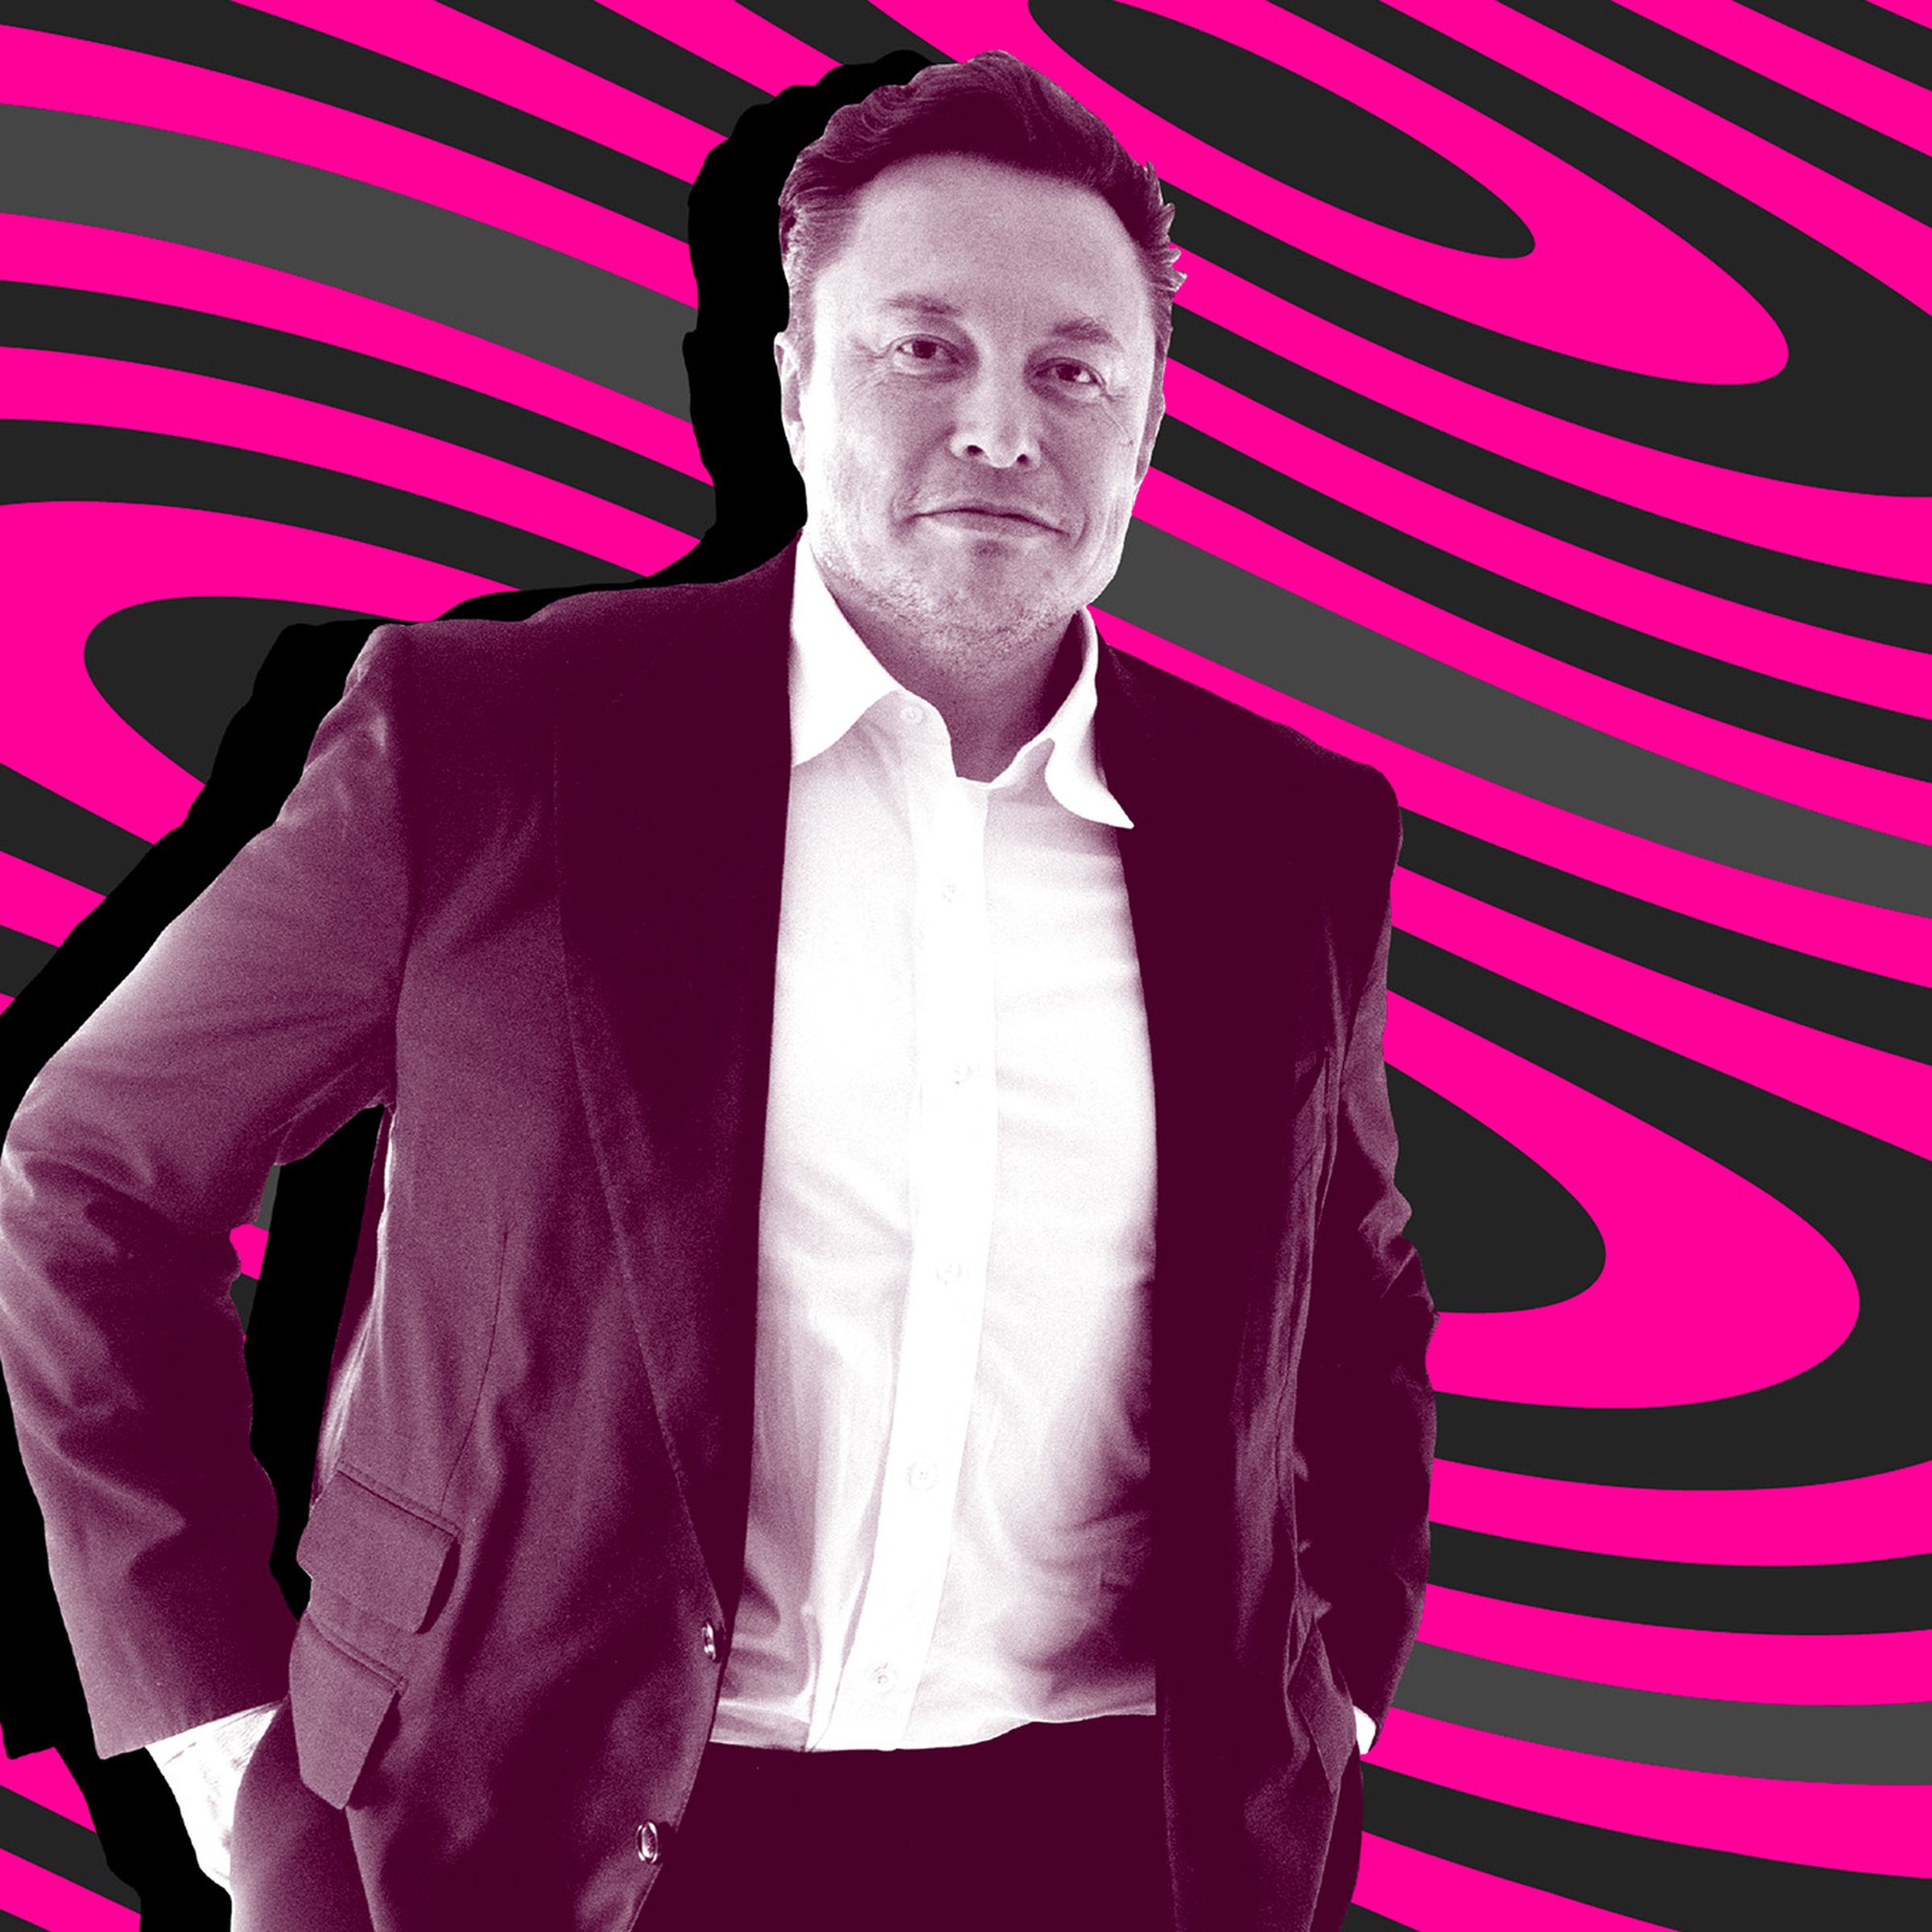 A magenta-hued photograph of Elon Musk against a wavy illustrated background.